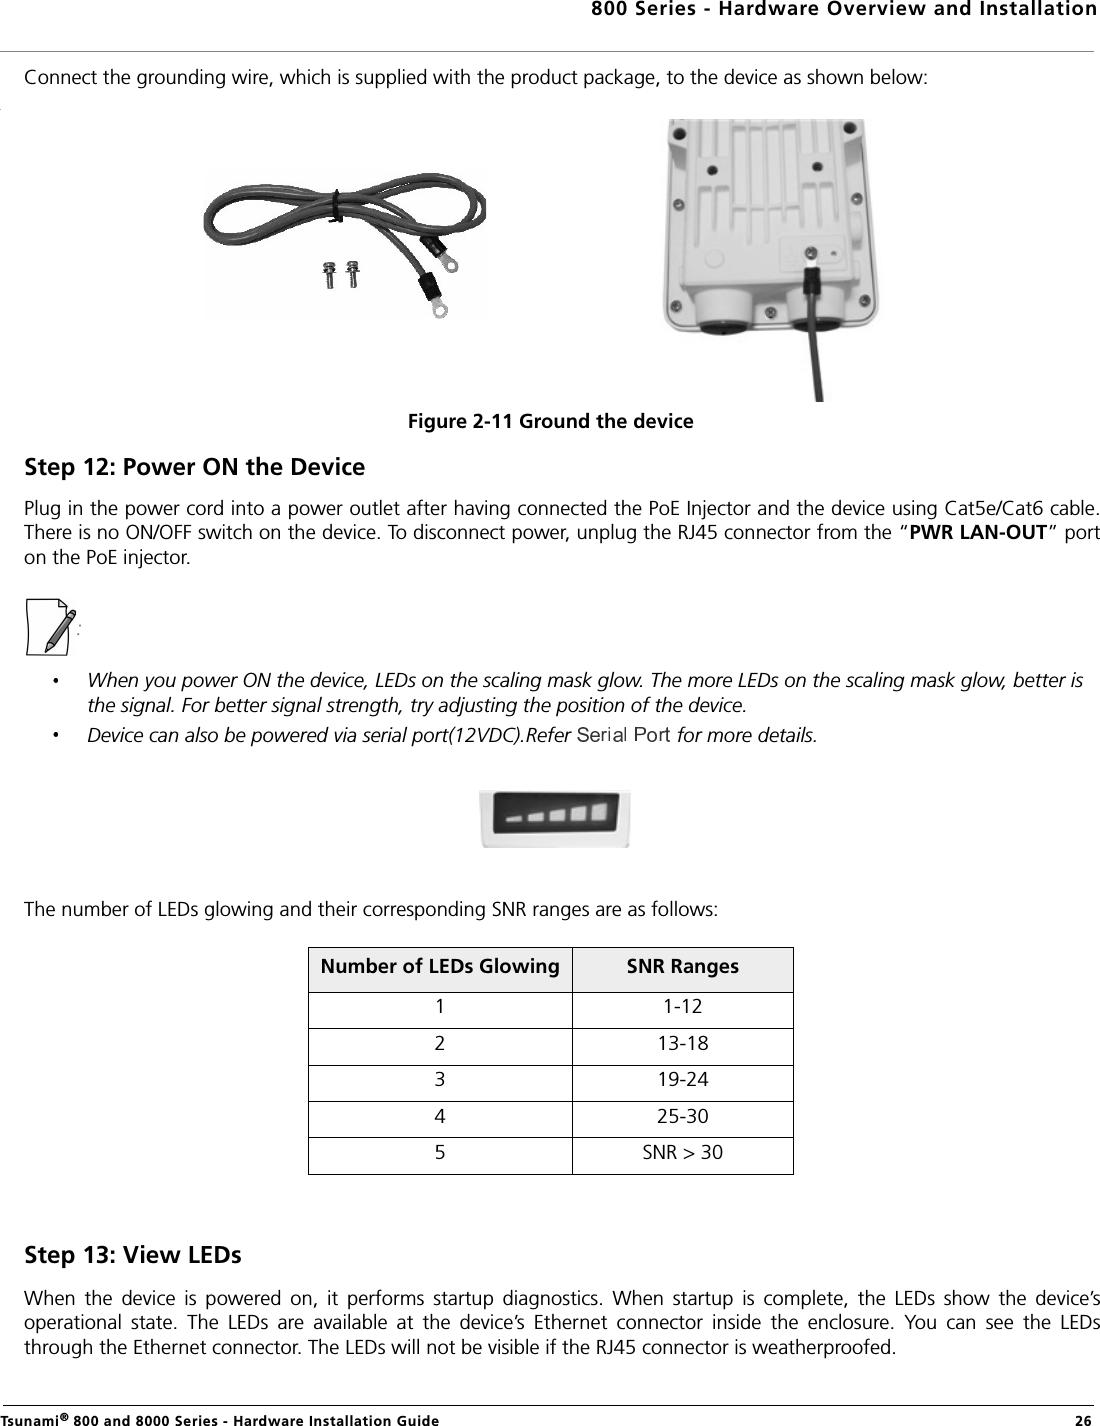 800 Series - Hardware Overview and InstallationTsunami® 800 and 8000 Series - Hardware Installation Guide  26Connect the grounding wire, which is supplied with the product package, to the device as shown below:Figure 2-11 Ground the deviceStep 12: Power ON the DevicePlug in the power cord into a power outlet after having connected the PoE Injector and the device using Cat5e/Cat6 cable.There is no ON/OFF switch on the device. To disconnect power, unplug the RJ45 connector from the “PWR LAN-OUT” porton the PoE injector.: When you power ON the device, LEDs on the scaling mask glow. The more LEDs on the scaling mask glow, better is the signal. For better signal strength, try adjusting the position of the device.Device can also be powered via serial port(12VDC).Refer   for more details.The number of LEDs glowing and their corresponding SNR ranges are as follows:Step 13: View LEDsWhen  the  device  is  powered  on,  it  performs  startup  diagnostics.  When  startup  is  complete,  the  LEDs  show  the  device’soperational  state.  The  LEDs  are  available  at  the  device’s  Ethernet  connector  inside  the  enclosure.  You  can  see  the  LEDsthrough the Ethernet connector. The LEDs will not be visible if the RJ45 connector is weatherproofed.Number of LEDs Glowing SNR Ranges1 1-122 13-183 19-244 25-305 SNR &gt; 30